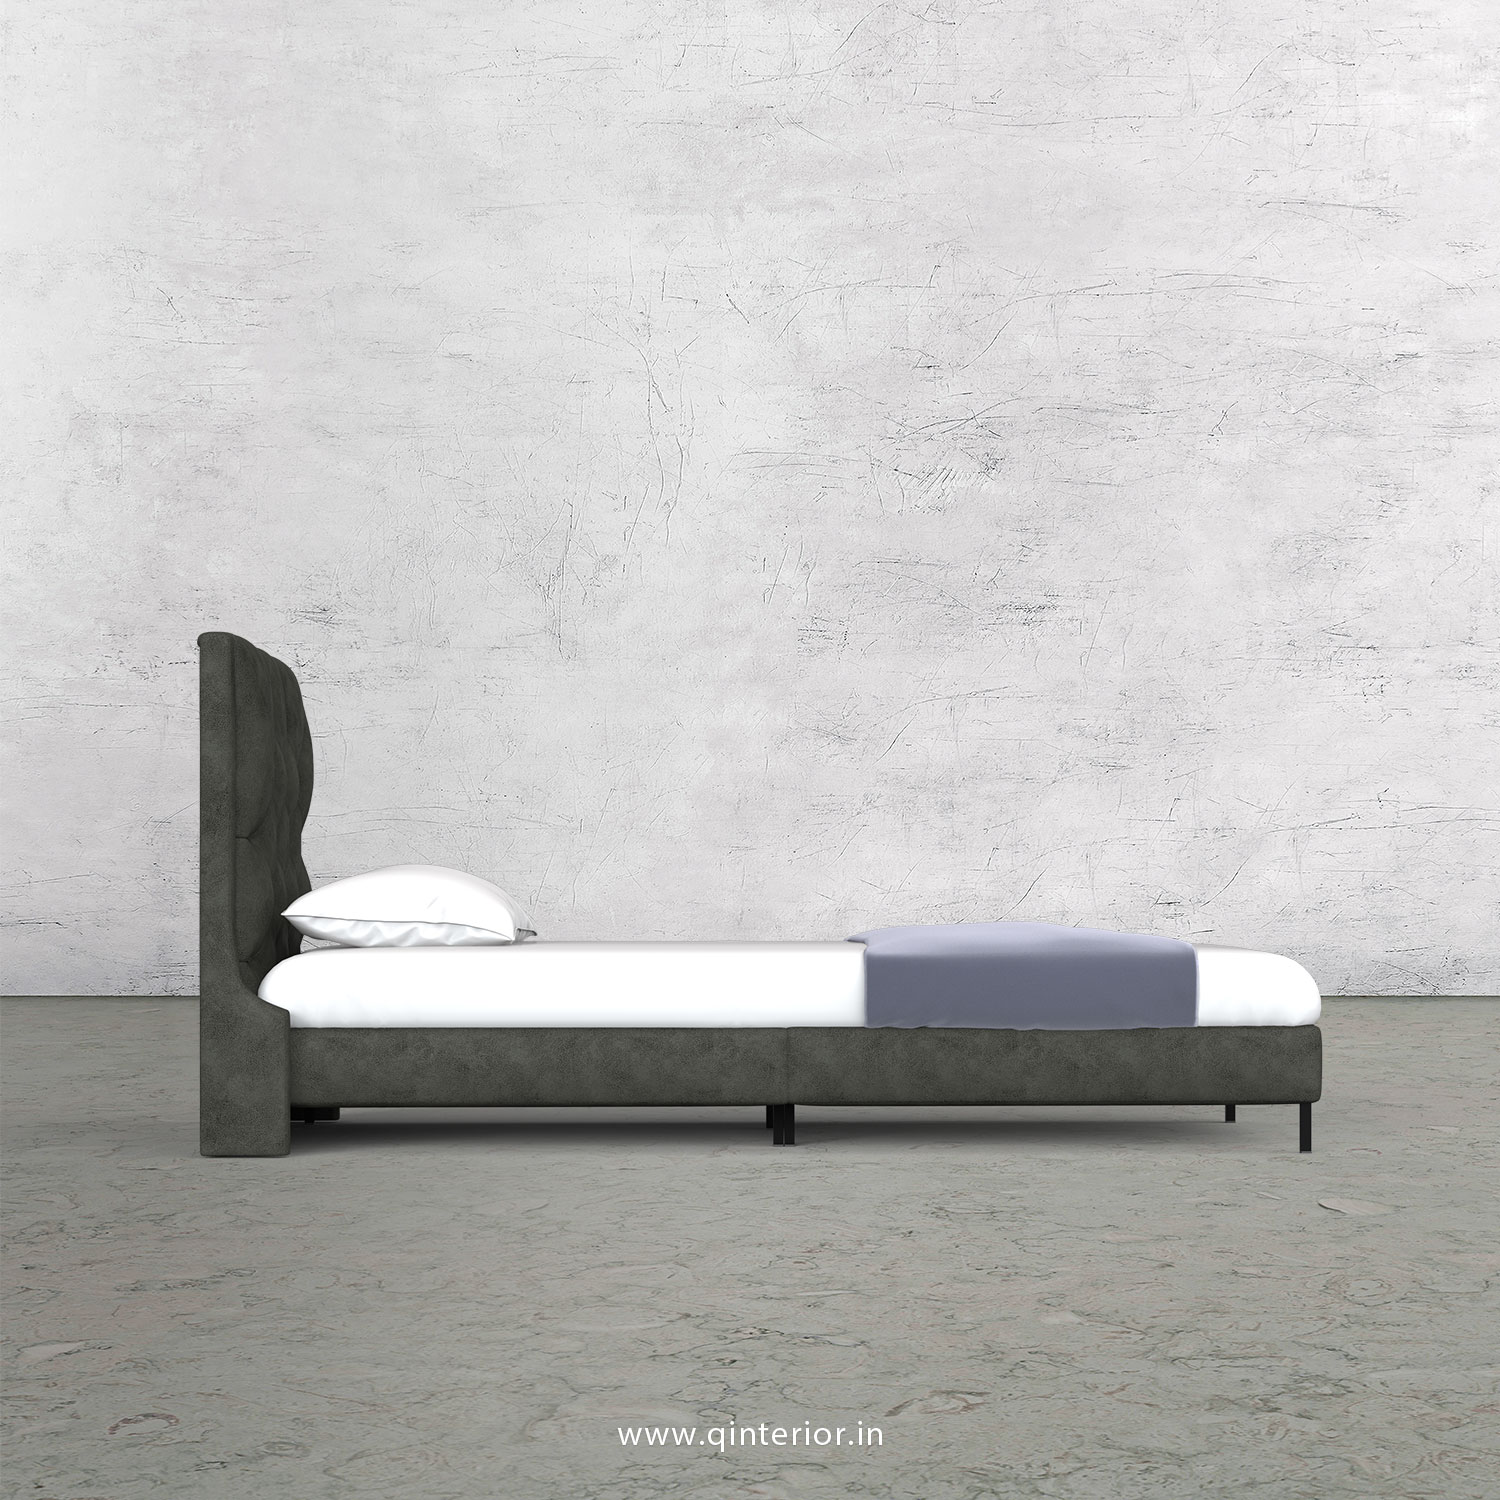 Scorpius Single Bed in Fab Leather – SBD003 FL07